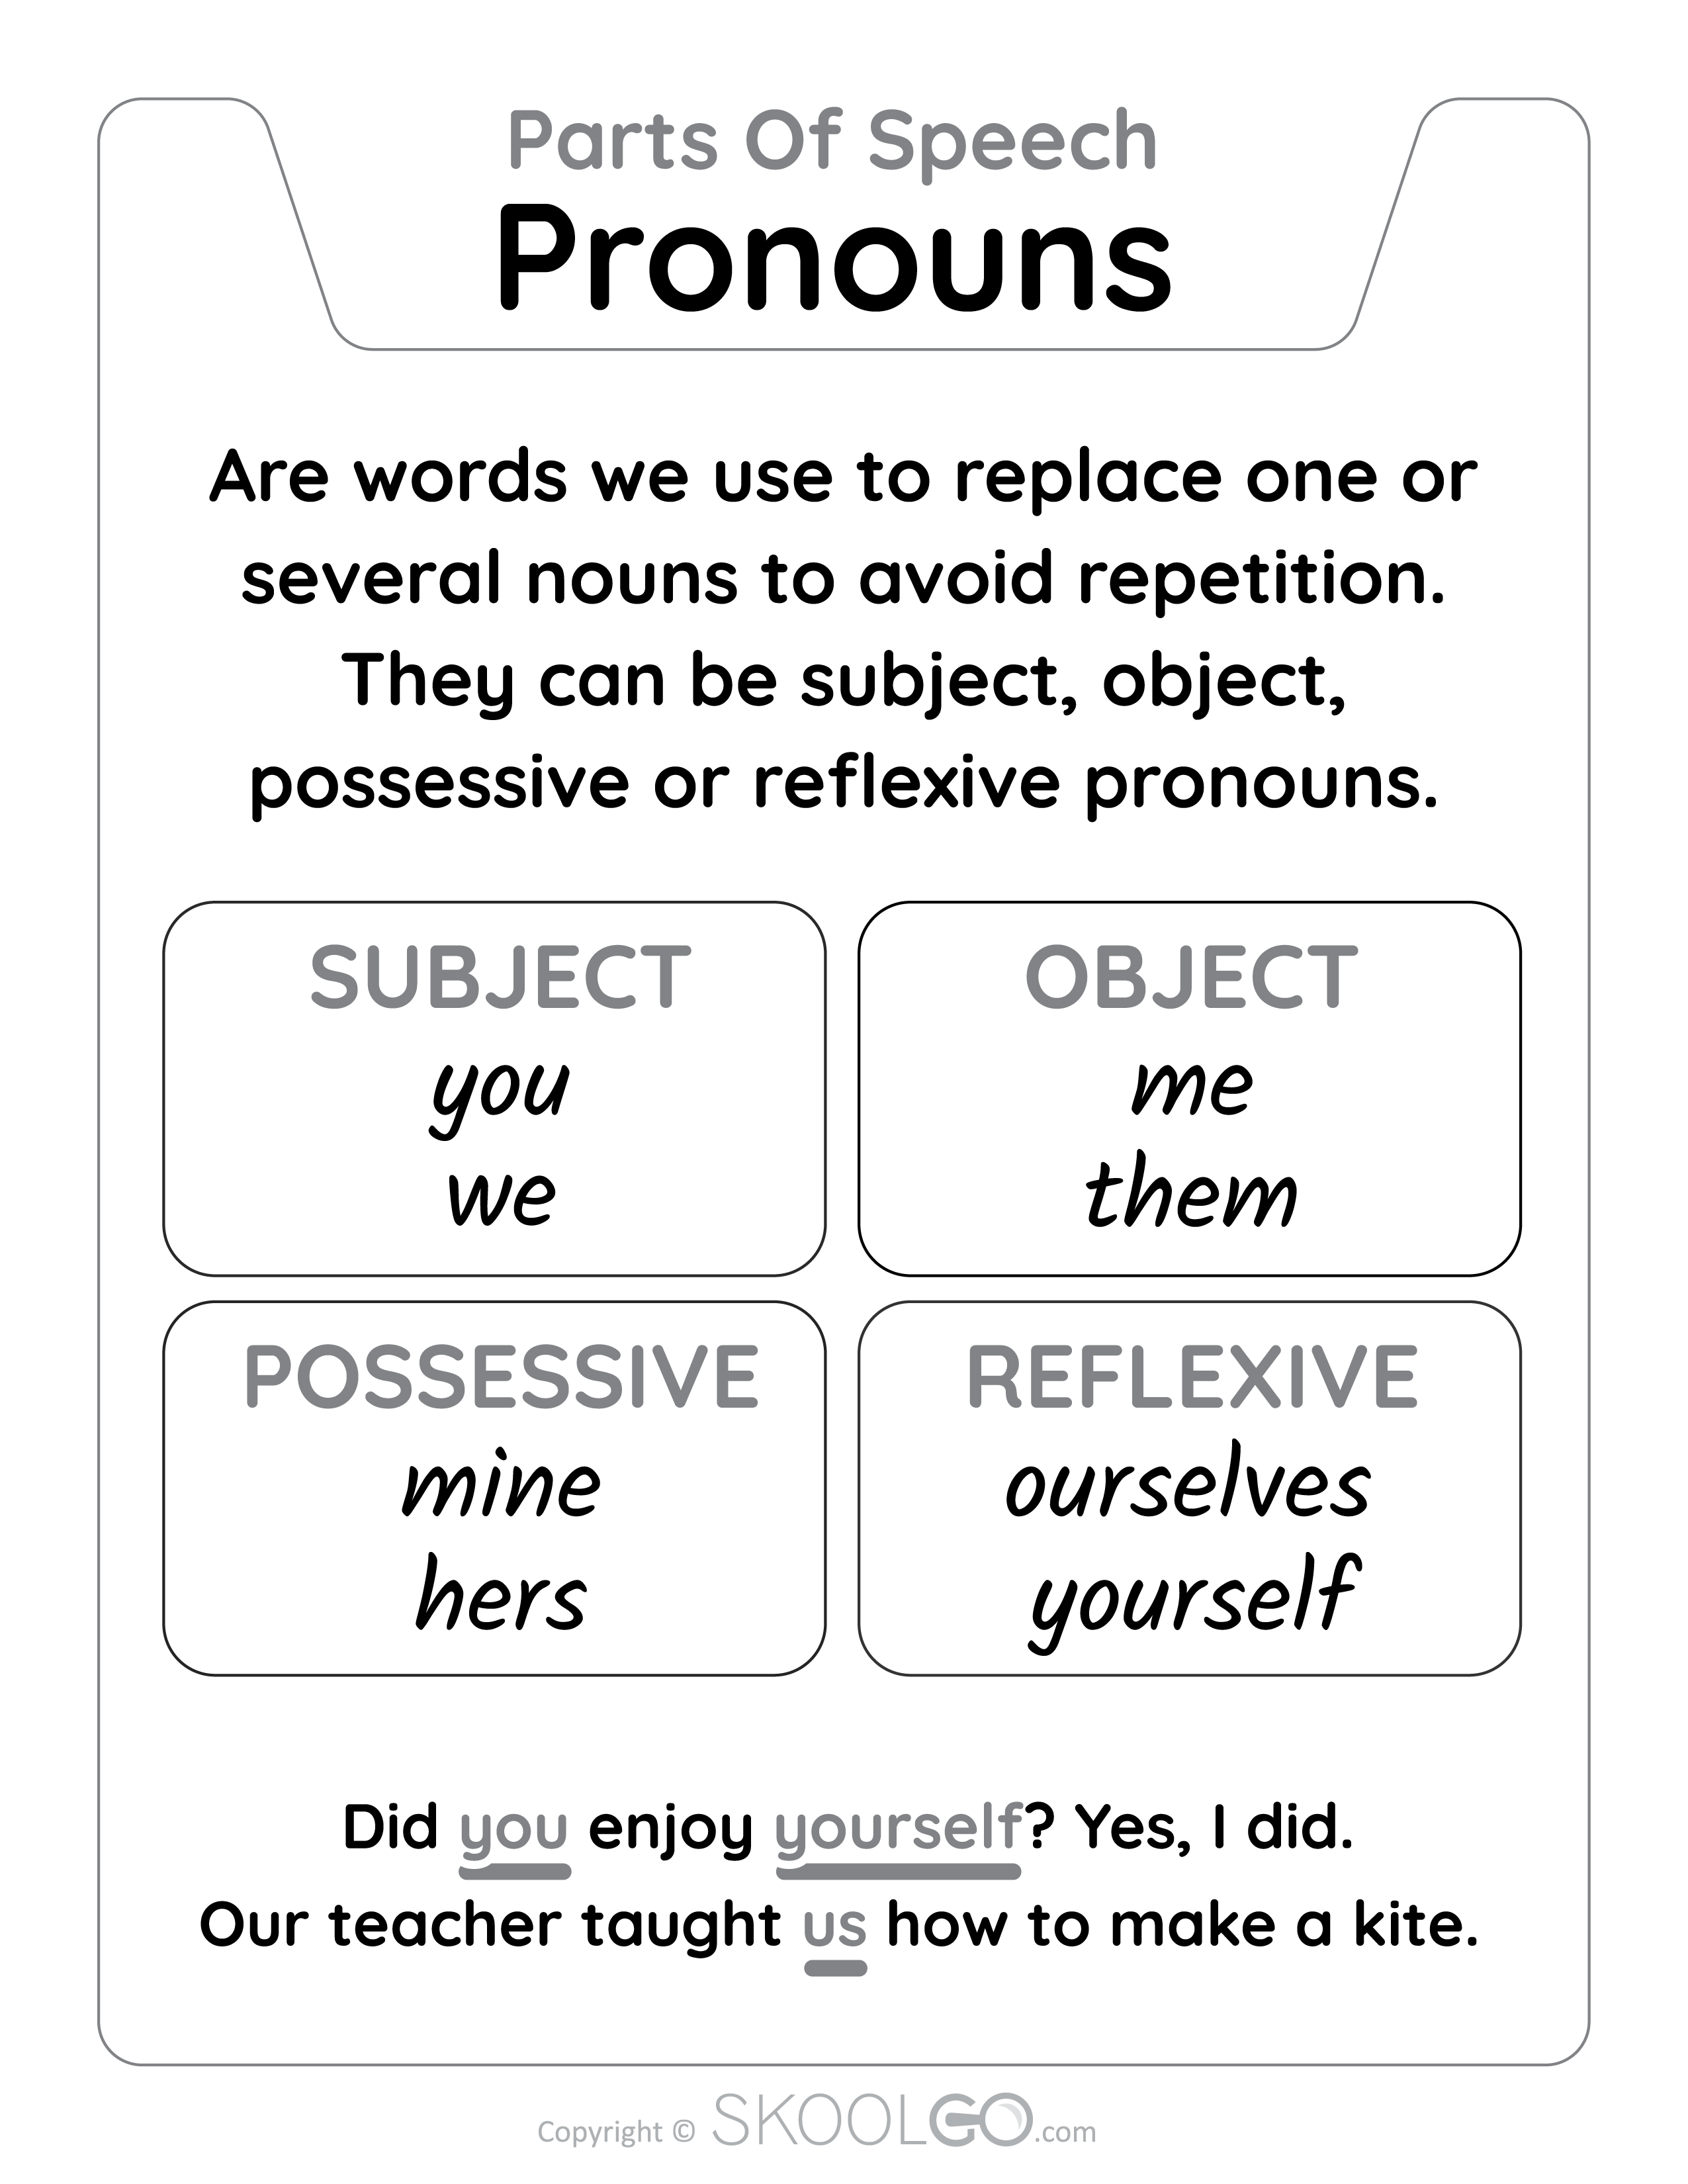 Pronouns - Parts Of Speech - Free Learning Classroom Poster